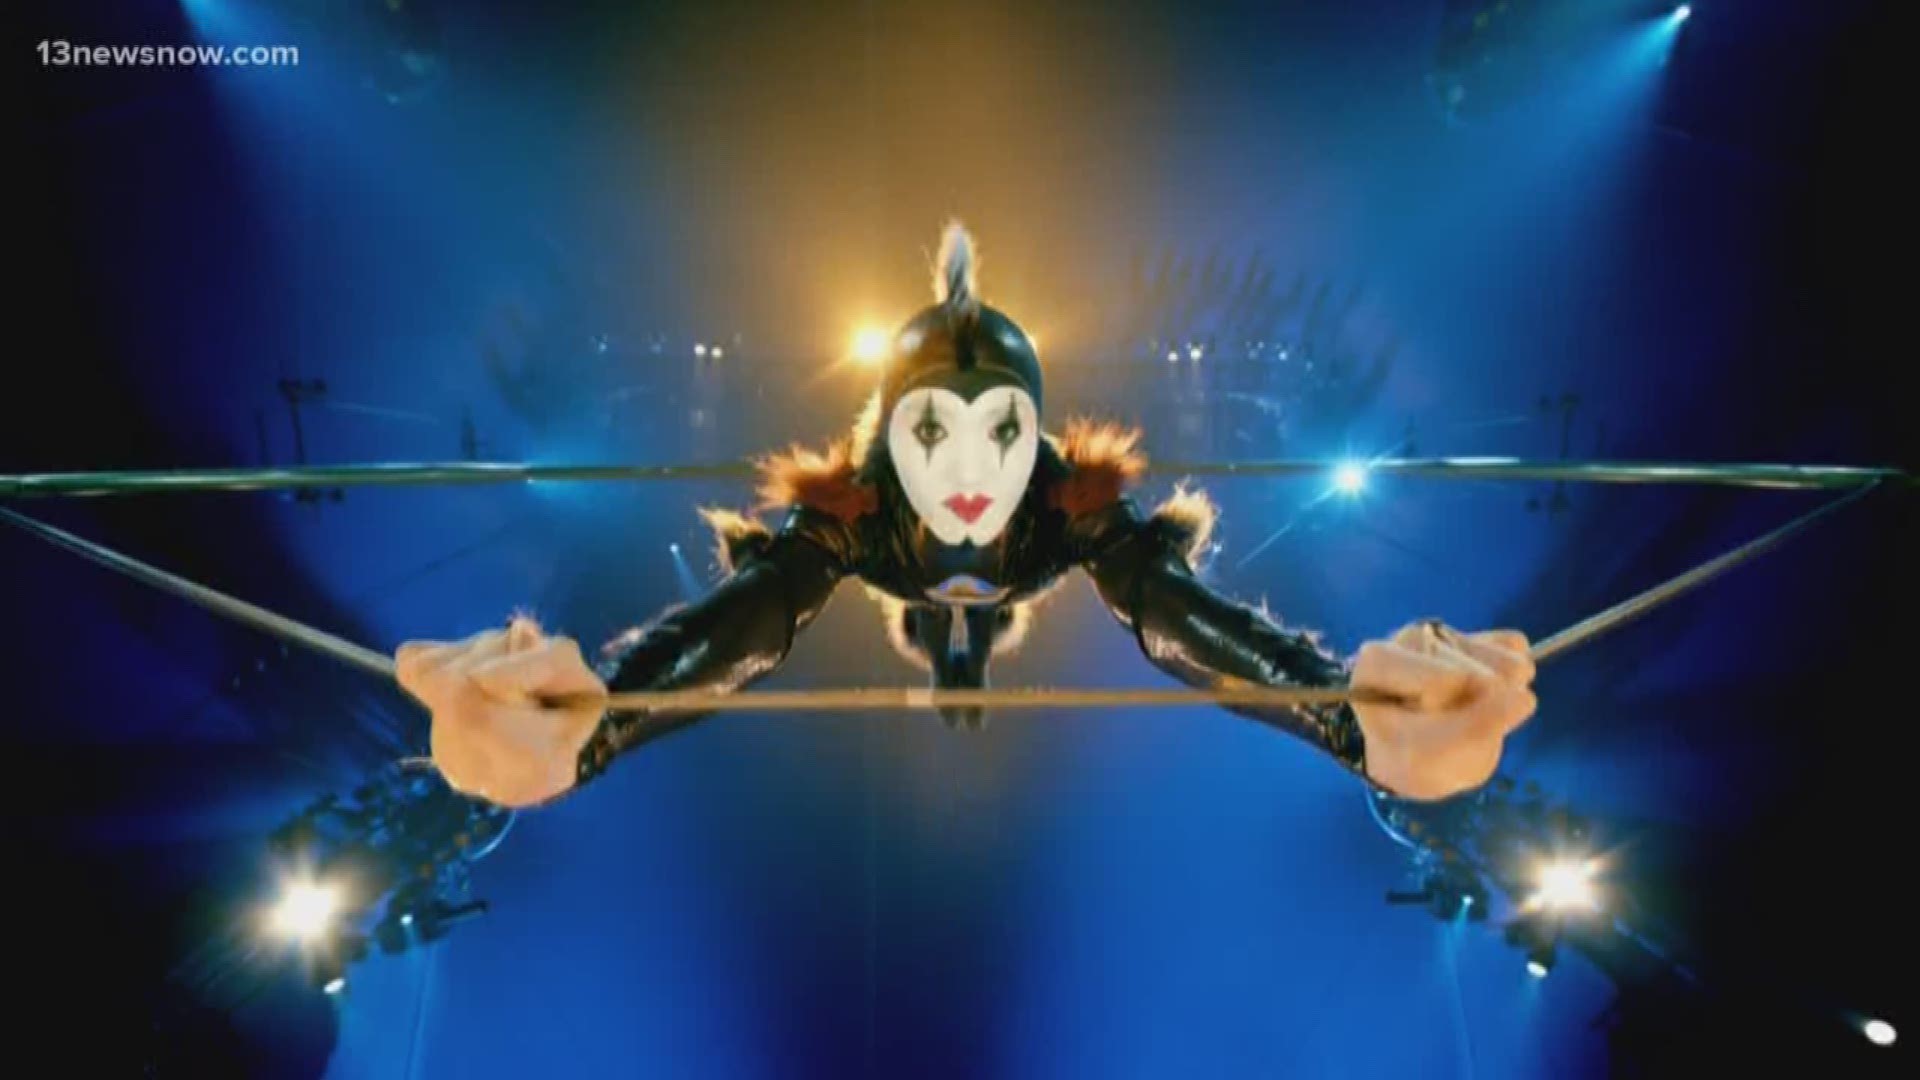 Cirque du Soleil OVO is bringing its high-energy show to the Scope Arena starting Friday through Dec. 29.